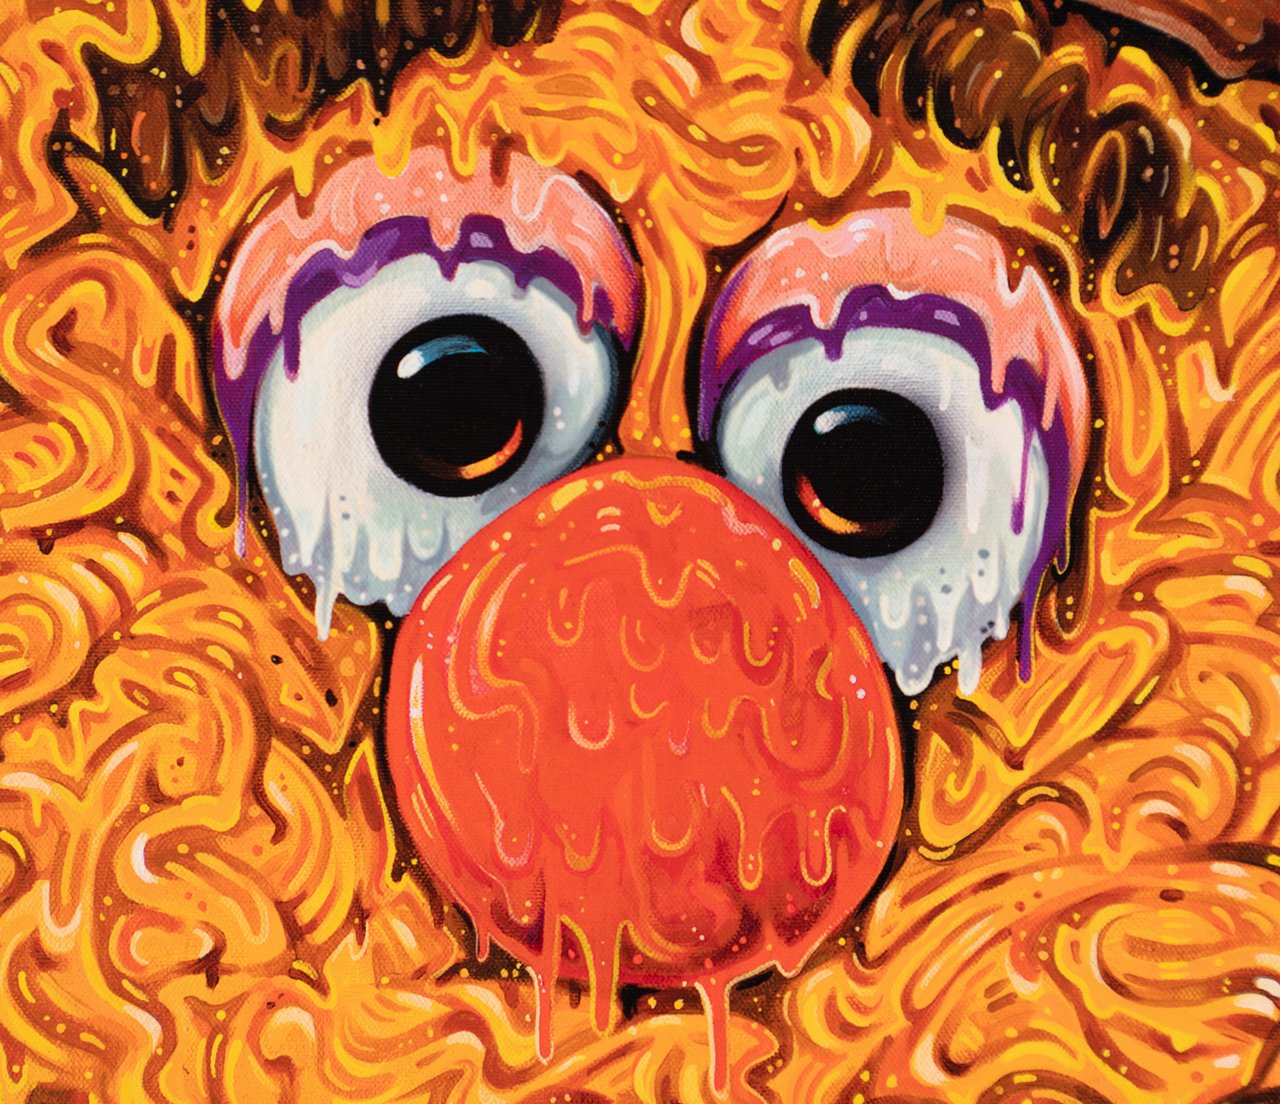 Close up of Fozzie Bear from Punchline by Robert Oxley, showing drip effect  